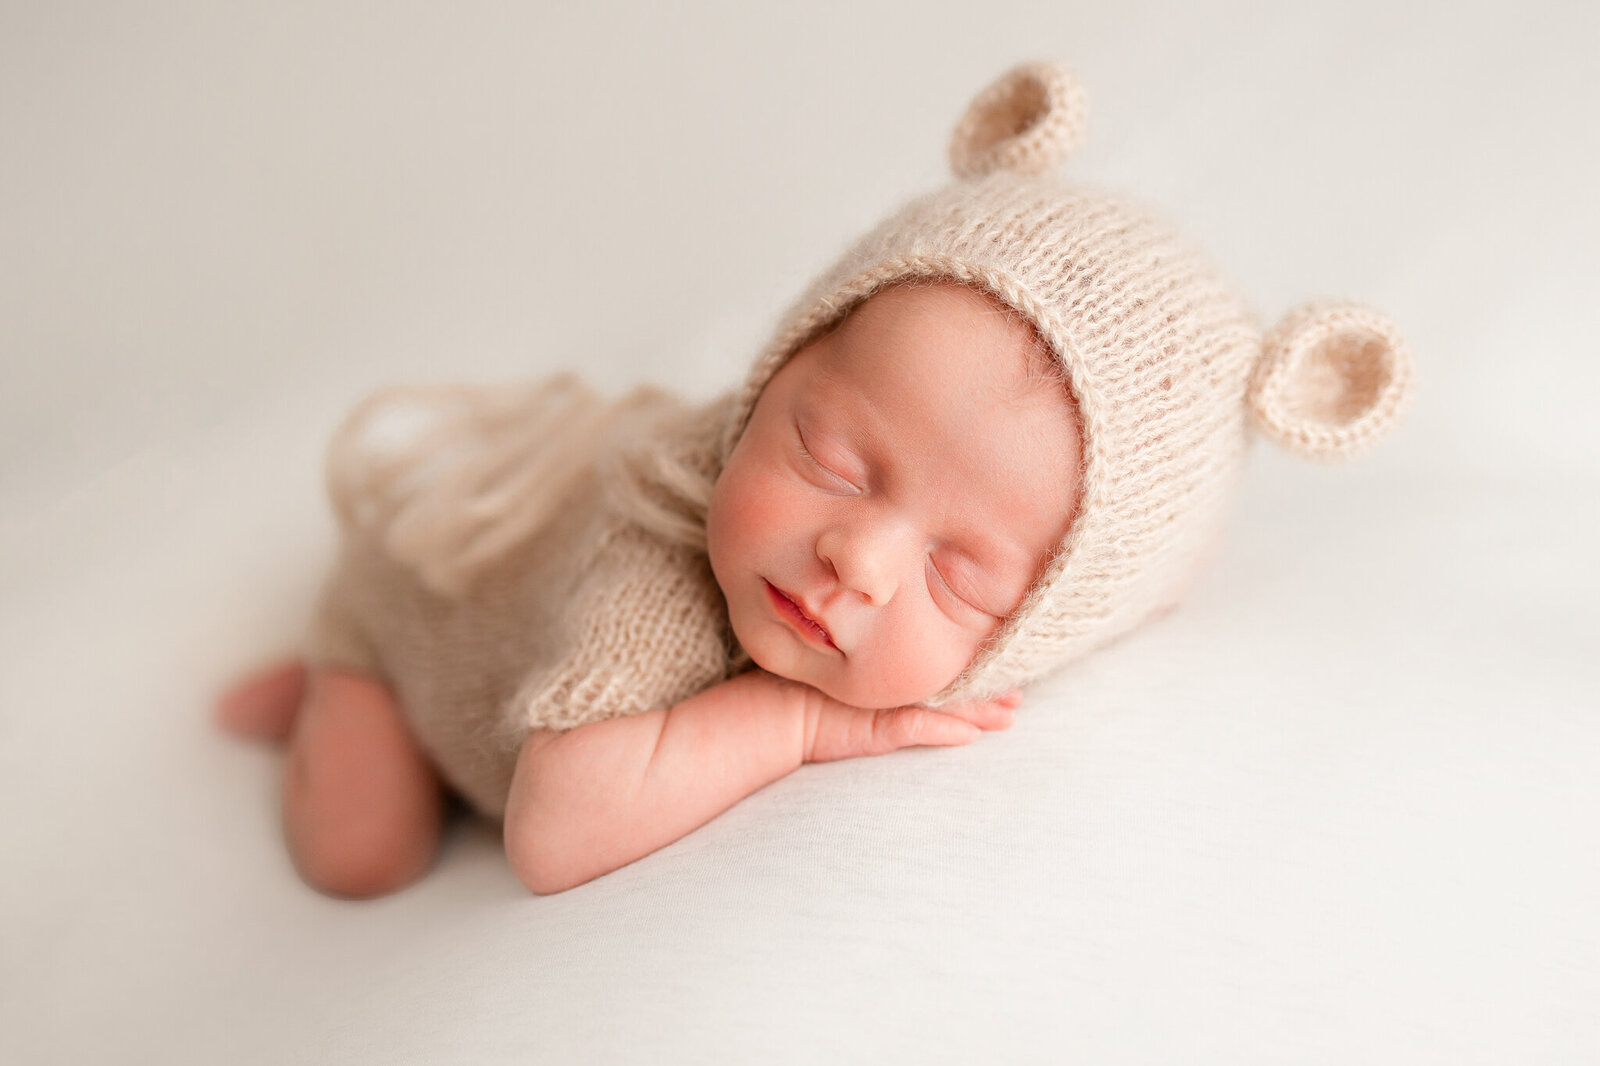 Beautiful newborn baby boy wearing a soft bear outfit posing with hands on chin